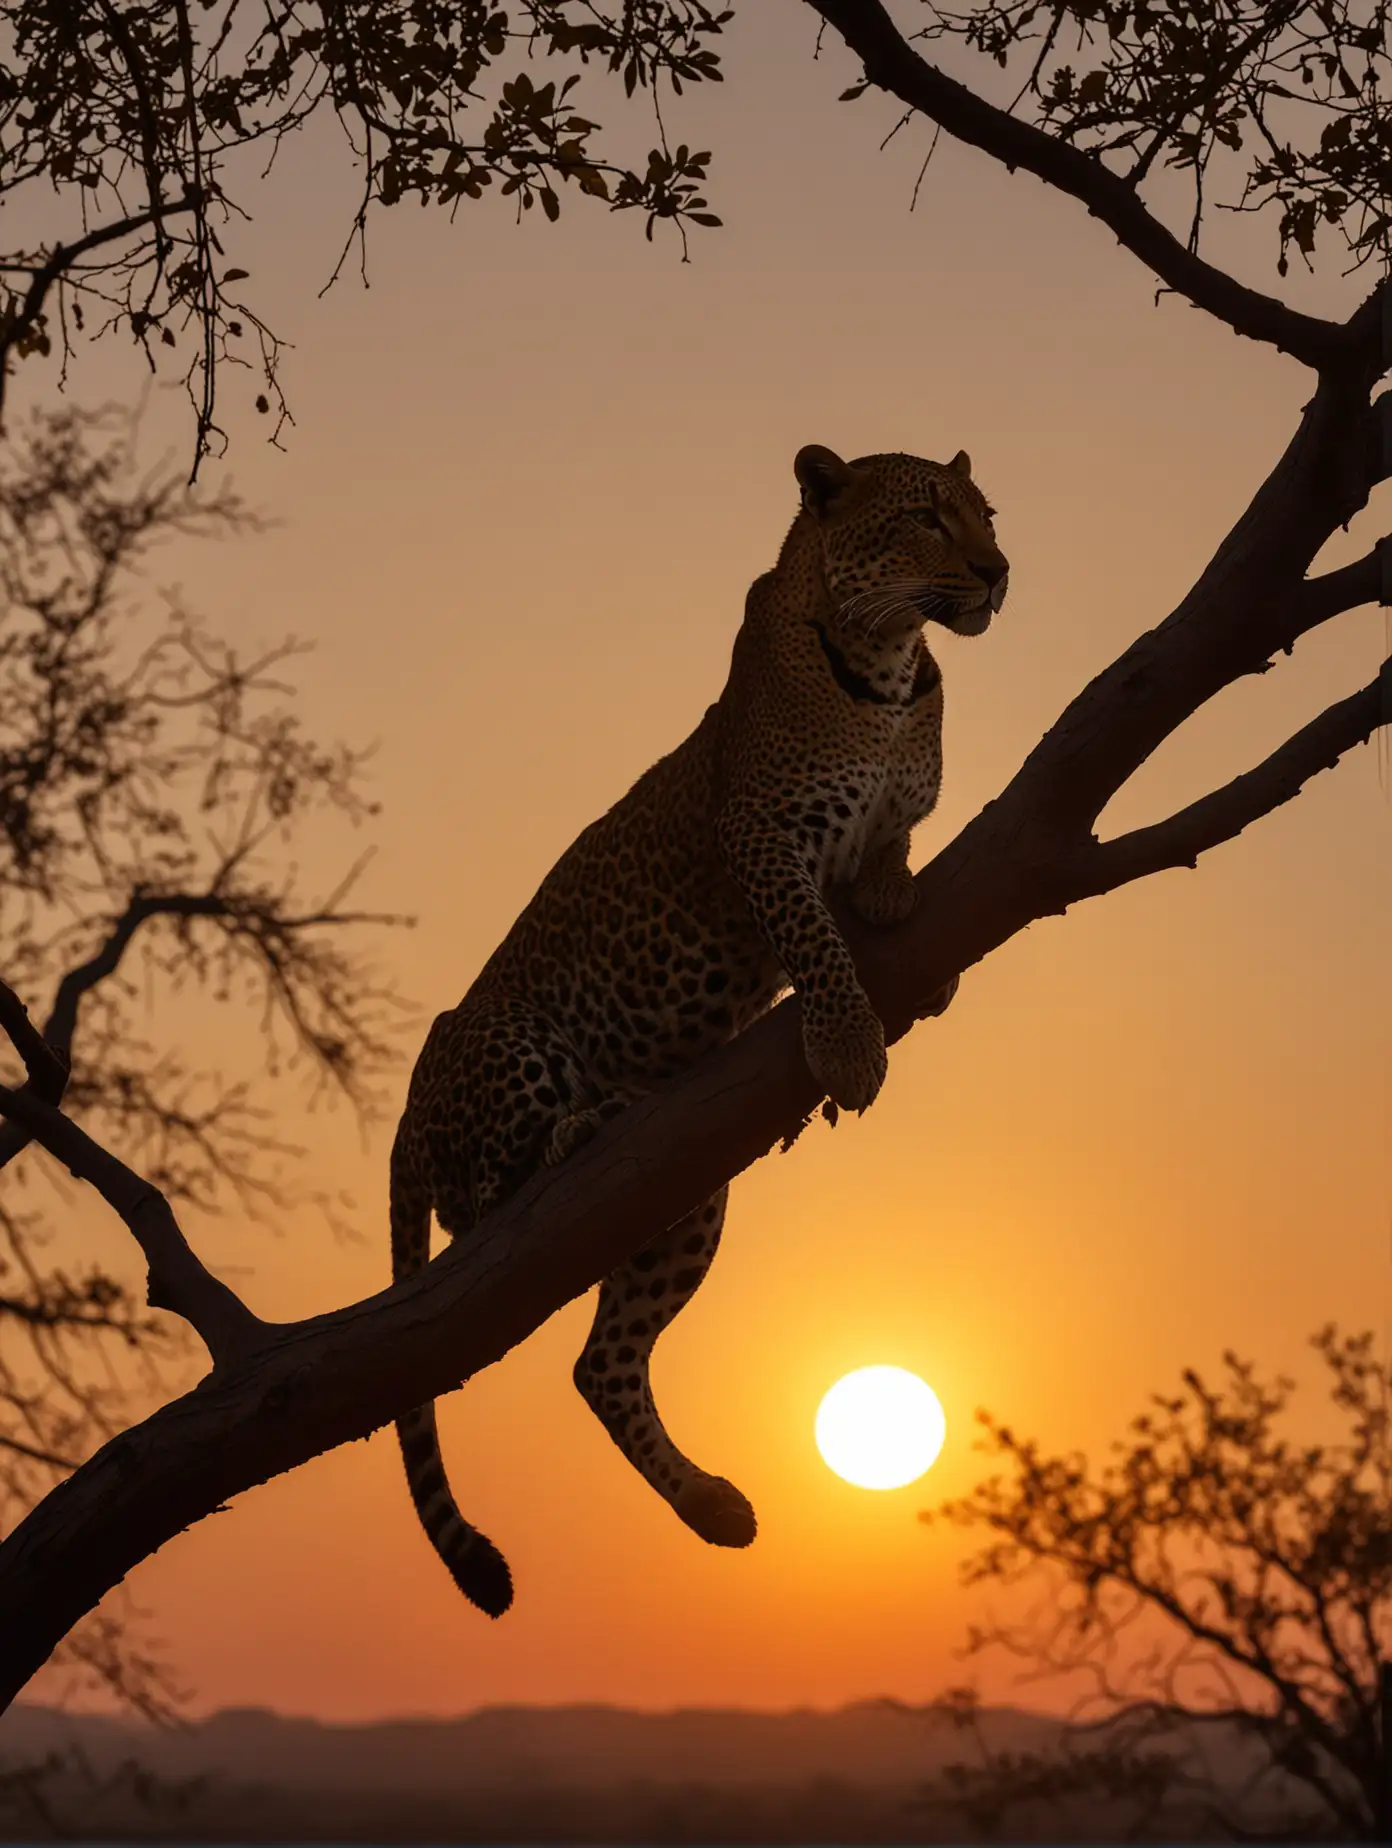 Silhouette of Leopard on Tree Branch at Sunset